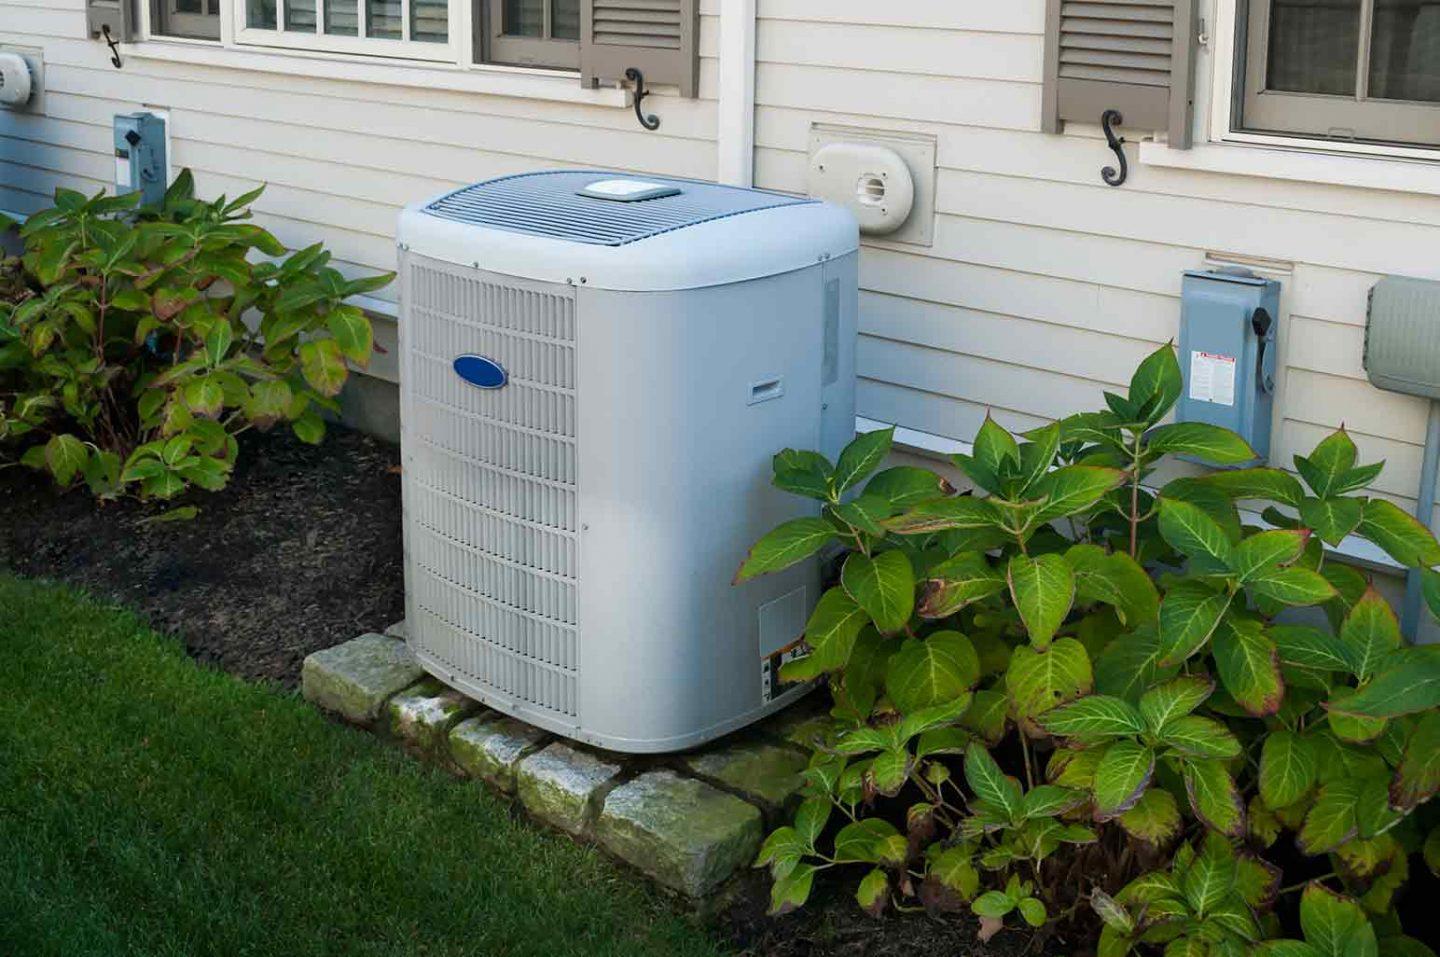 How to Properly Take Care of Your HVAC System